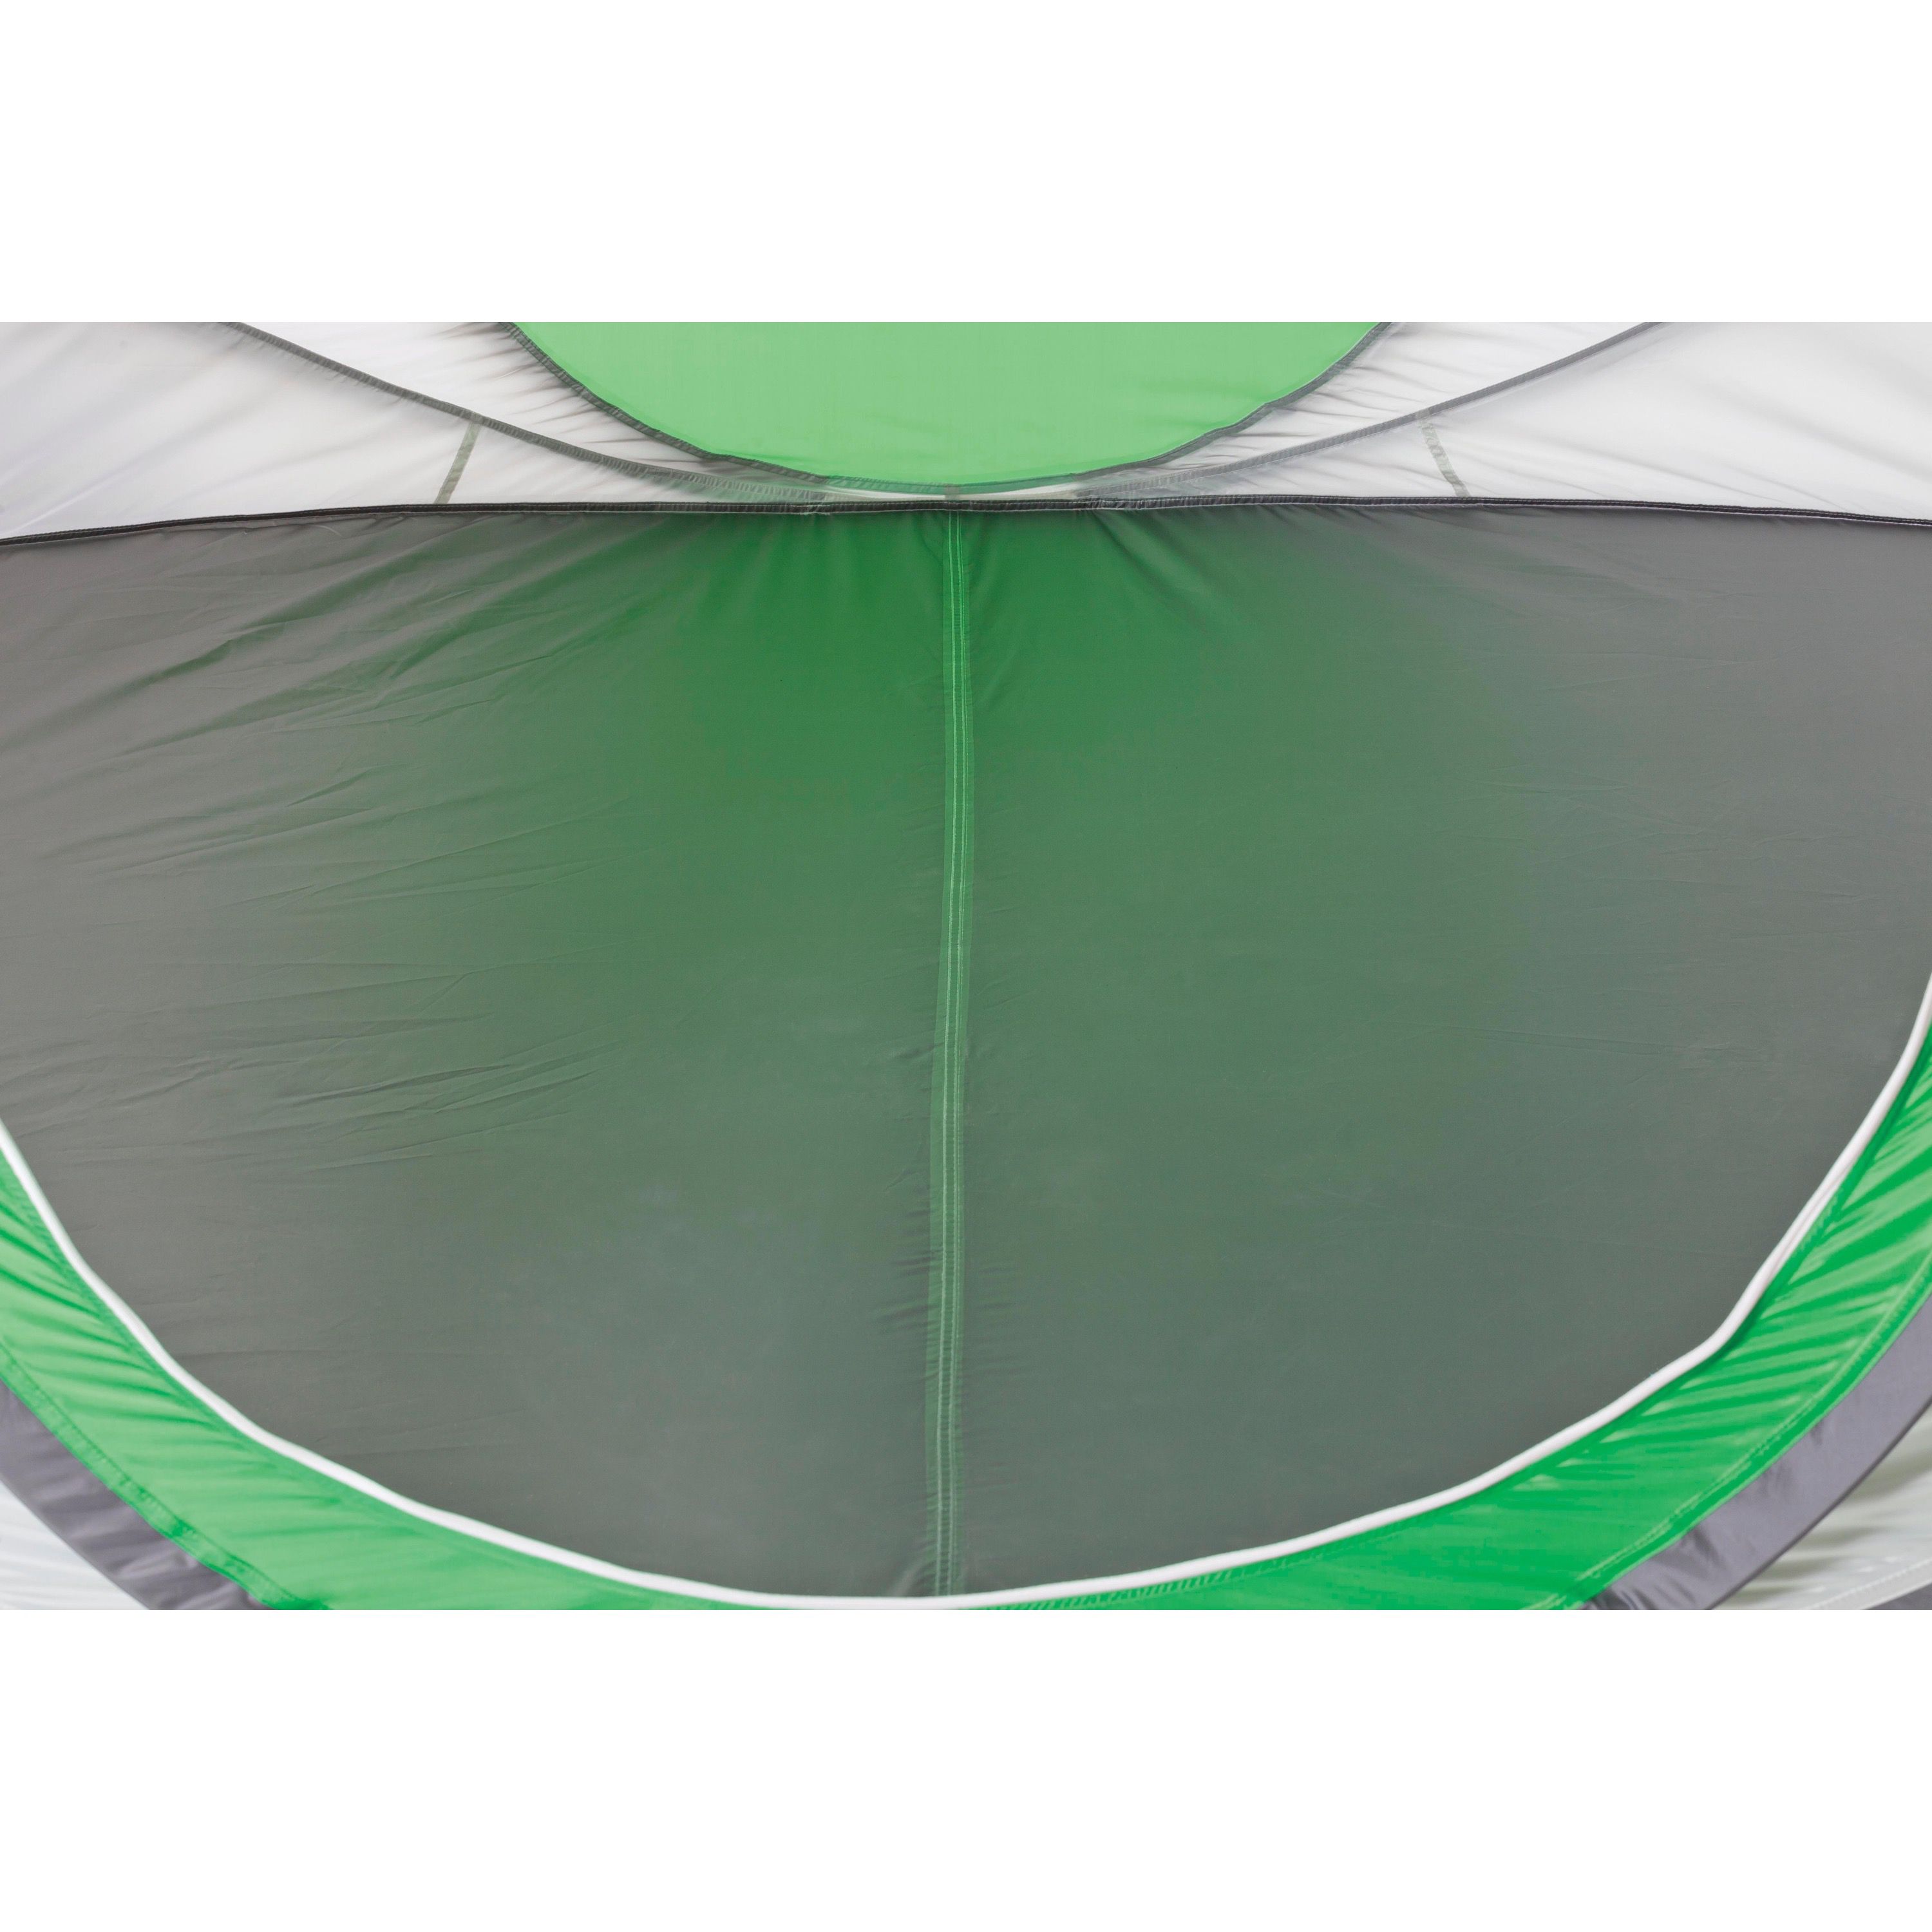 Coleman 4-Person Instant Pop-Up Tent 1 Room, Green - image 5 of 6